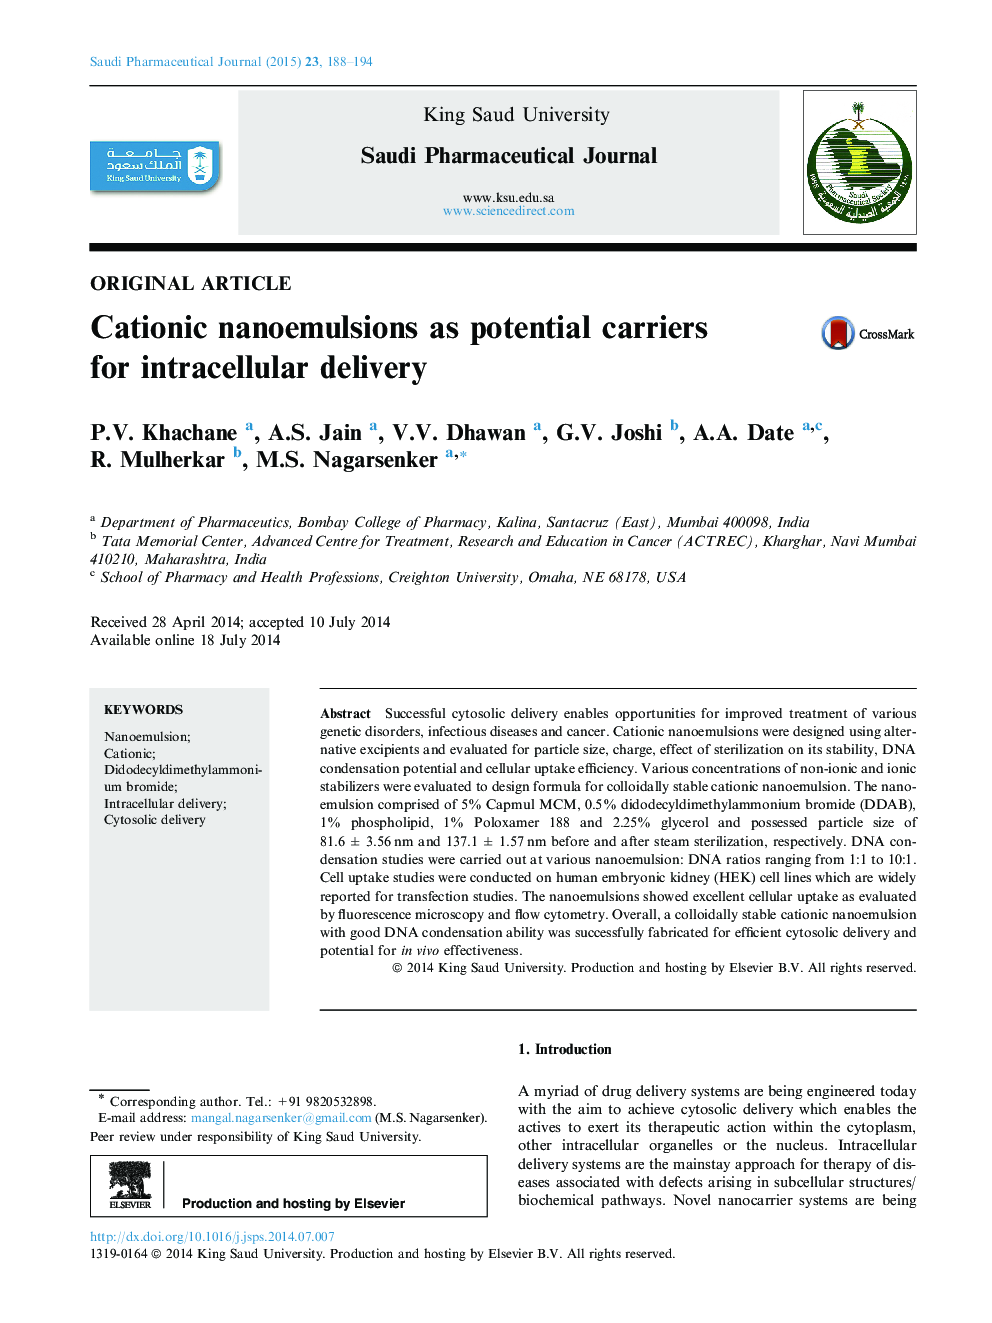 Cationic nanoemulsions as potential carriers for intracellular delivery 